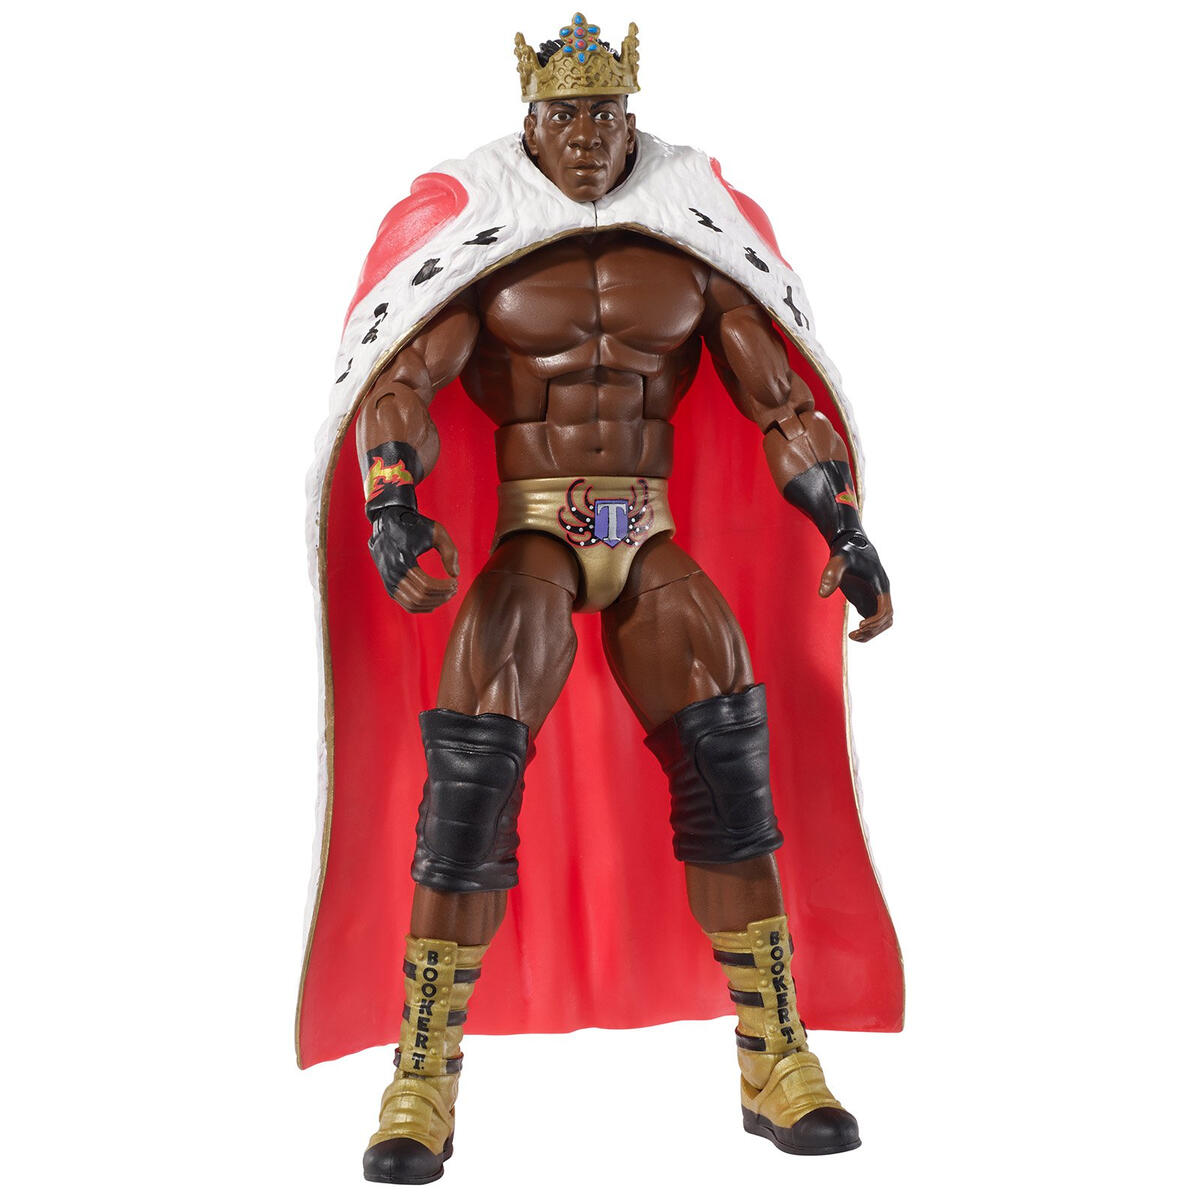 King Booker, with entrance cape, crown and scepter (WWE Hall of Fame Class of 2013)